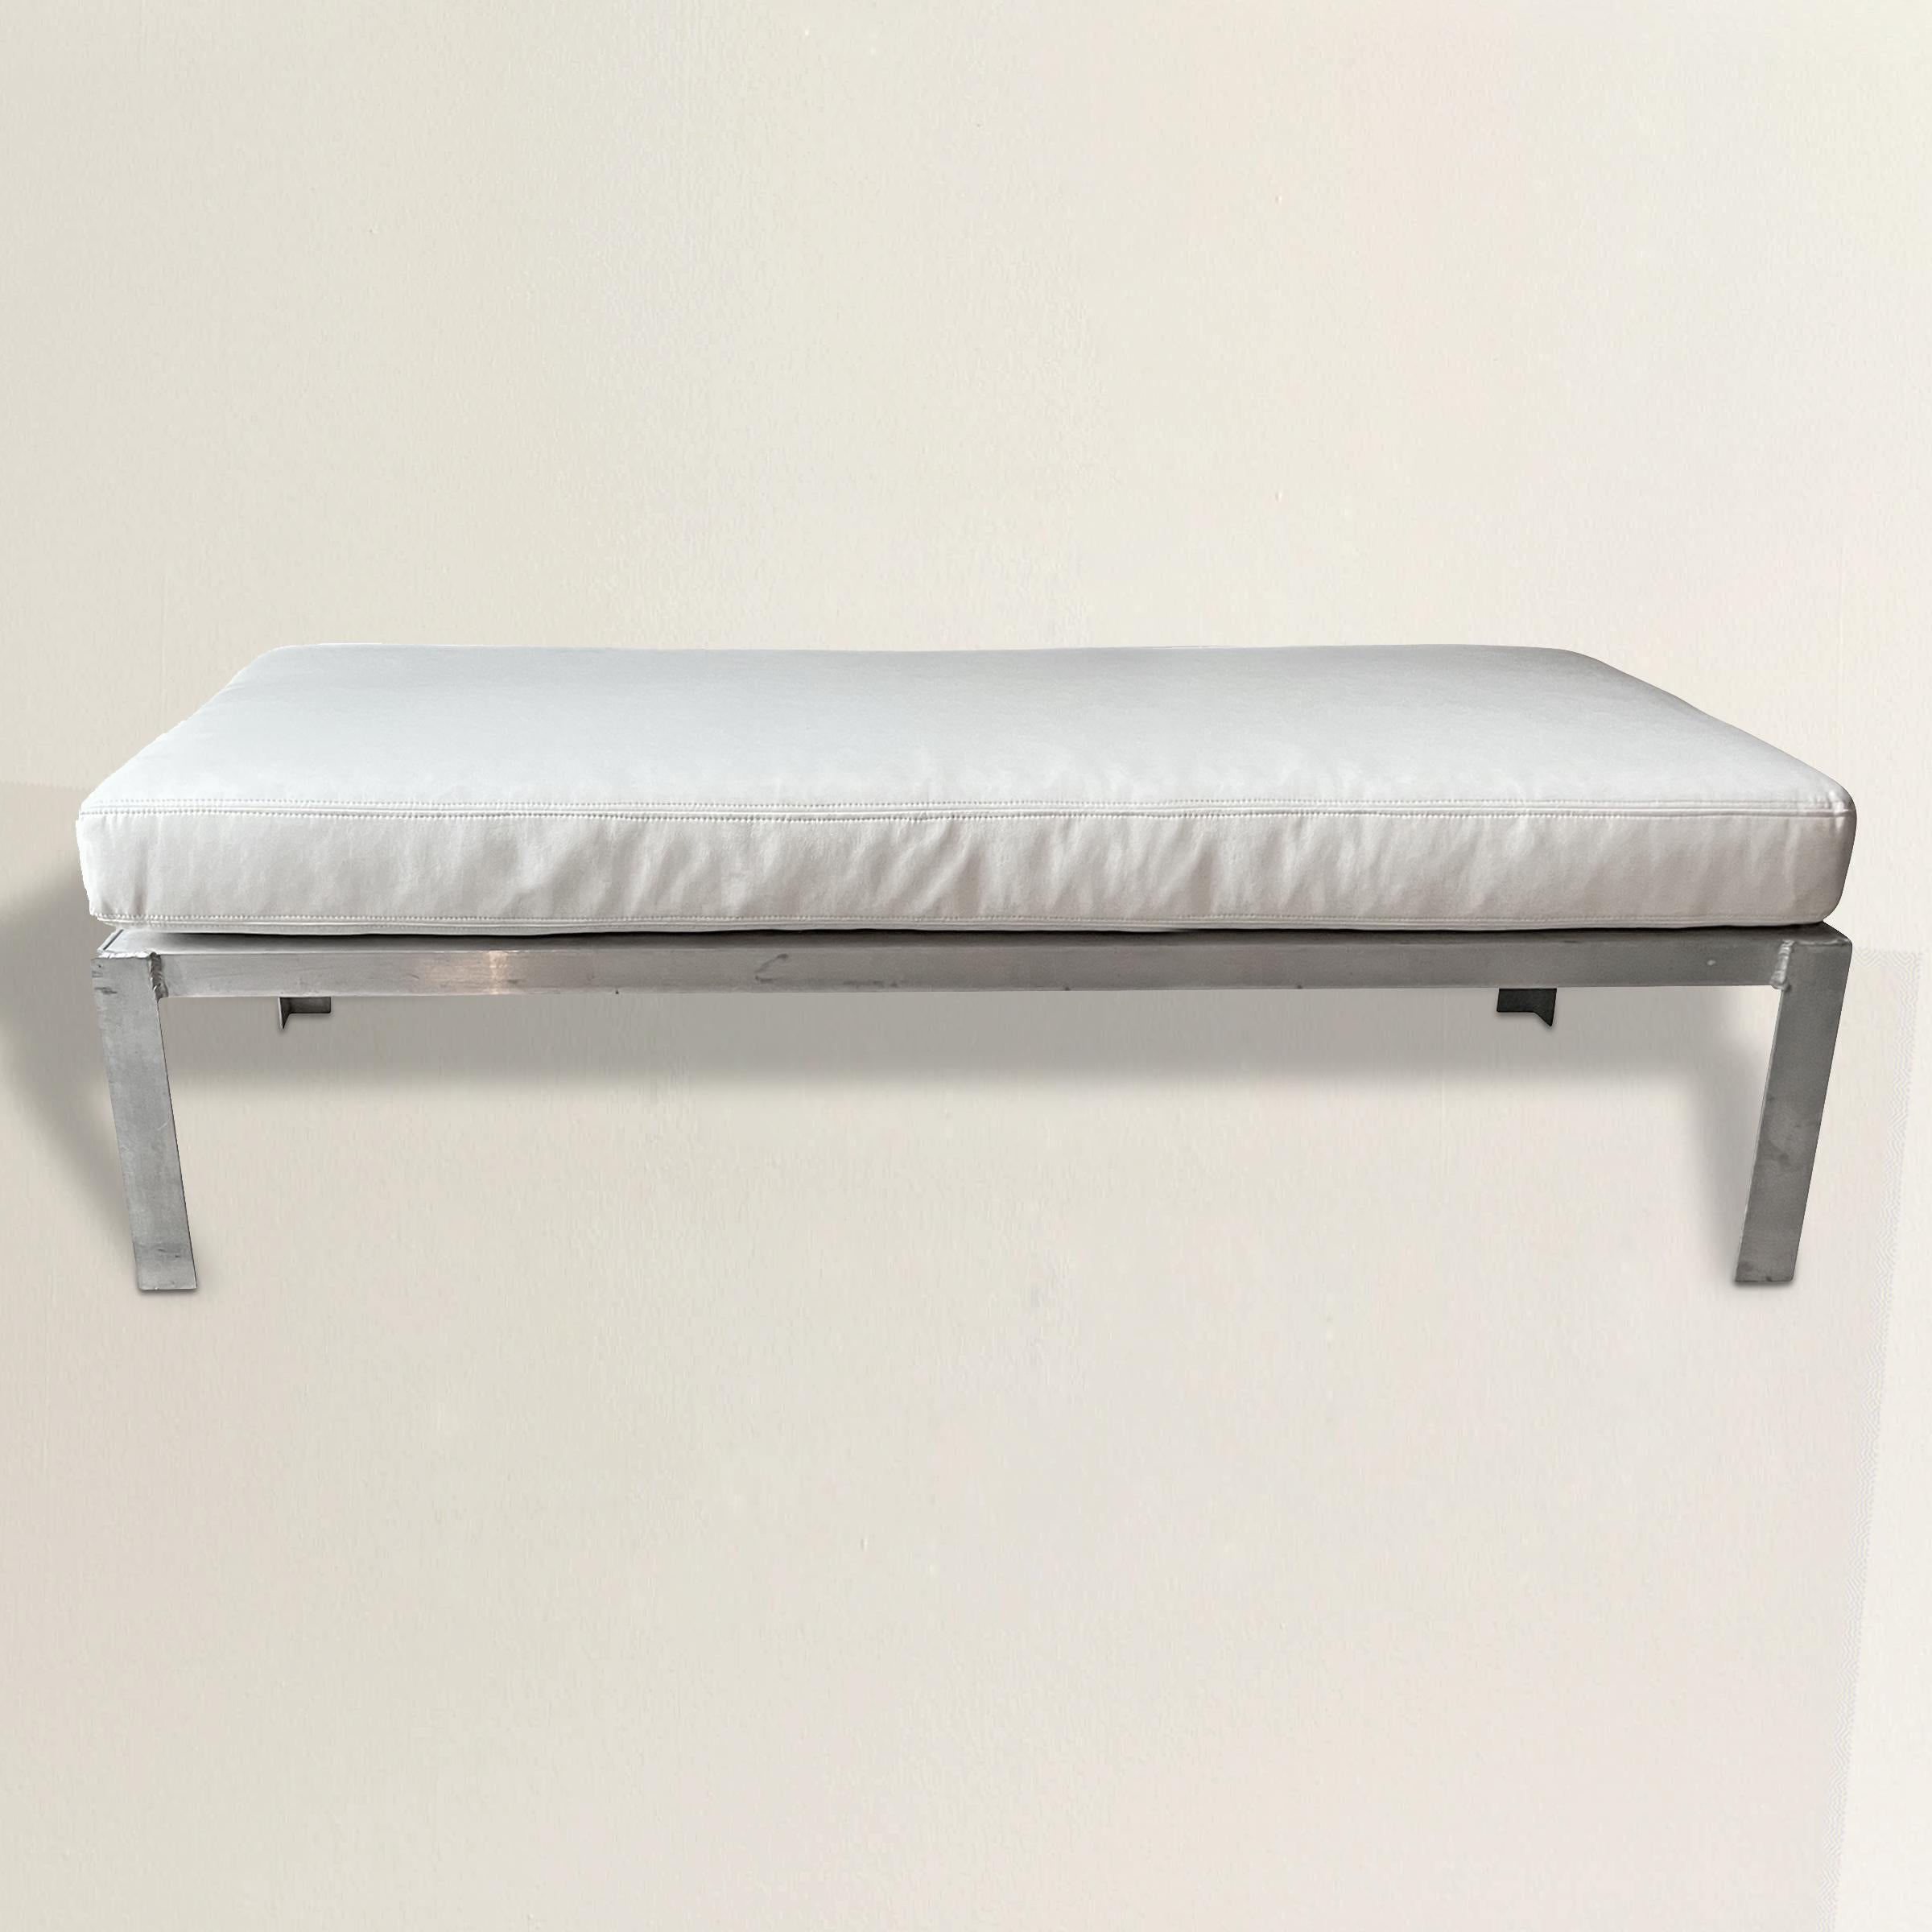 A simply but chic 20th century American industrial aluminum bench with a custom faux leather upholstered outdoor cushion. The perfect bench by your pool, or ottoman in front of an outdoor or indoor sofa.